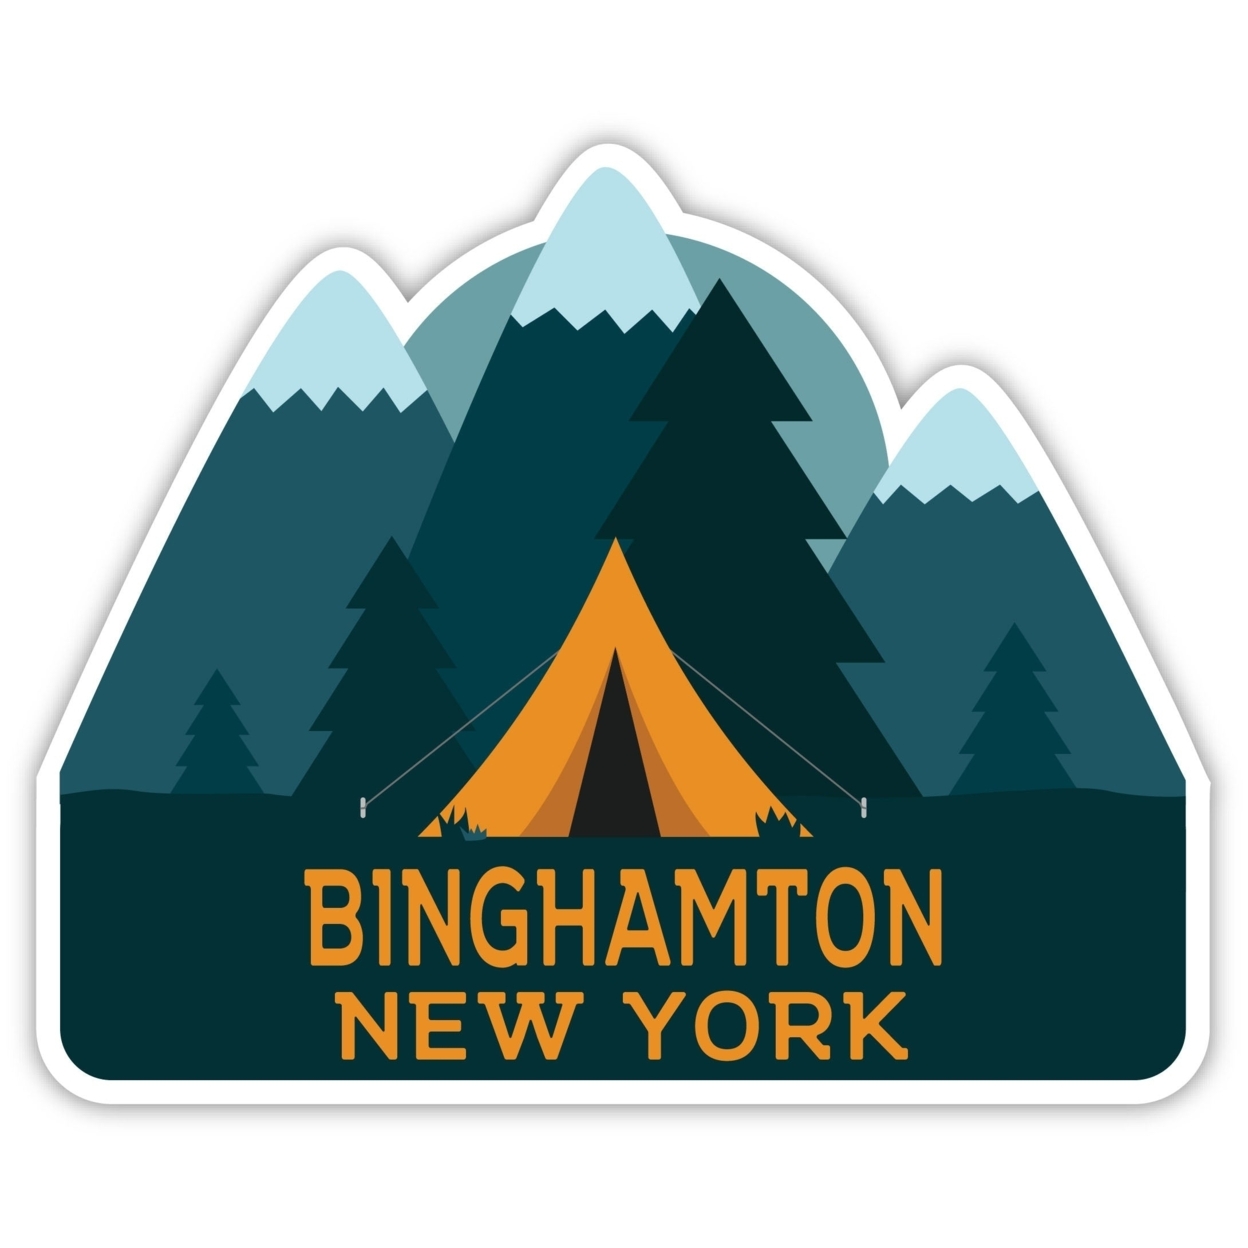 Binghamton New York Souvenir Decorative Stickers (Choose Theme And Size) - 4-Pack, 12-Inch, Tent